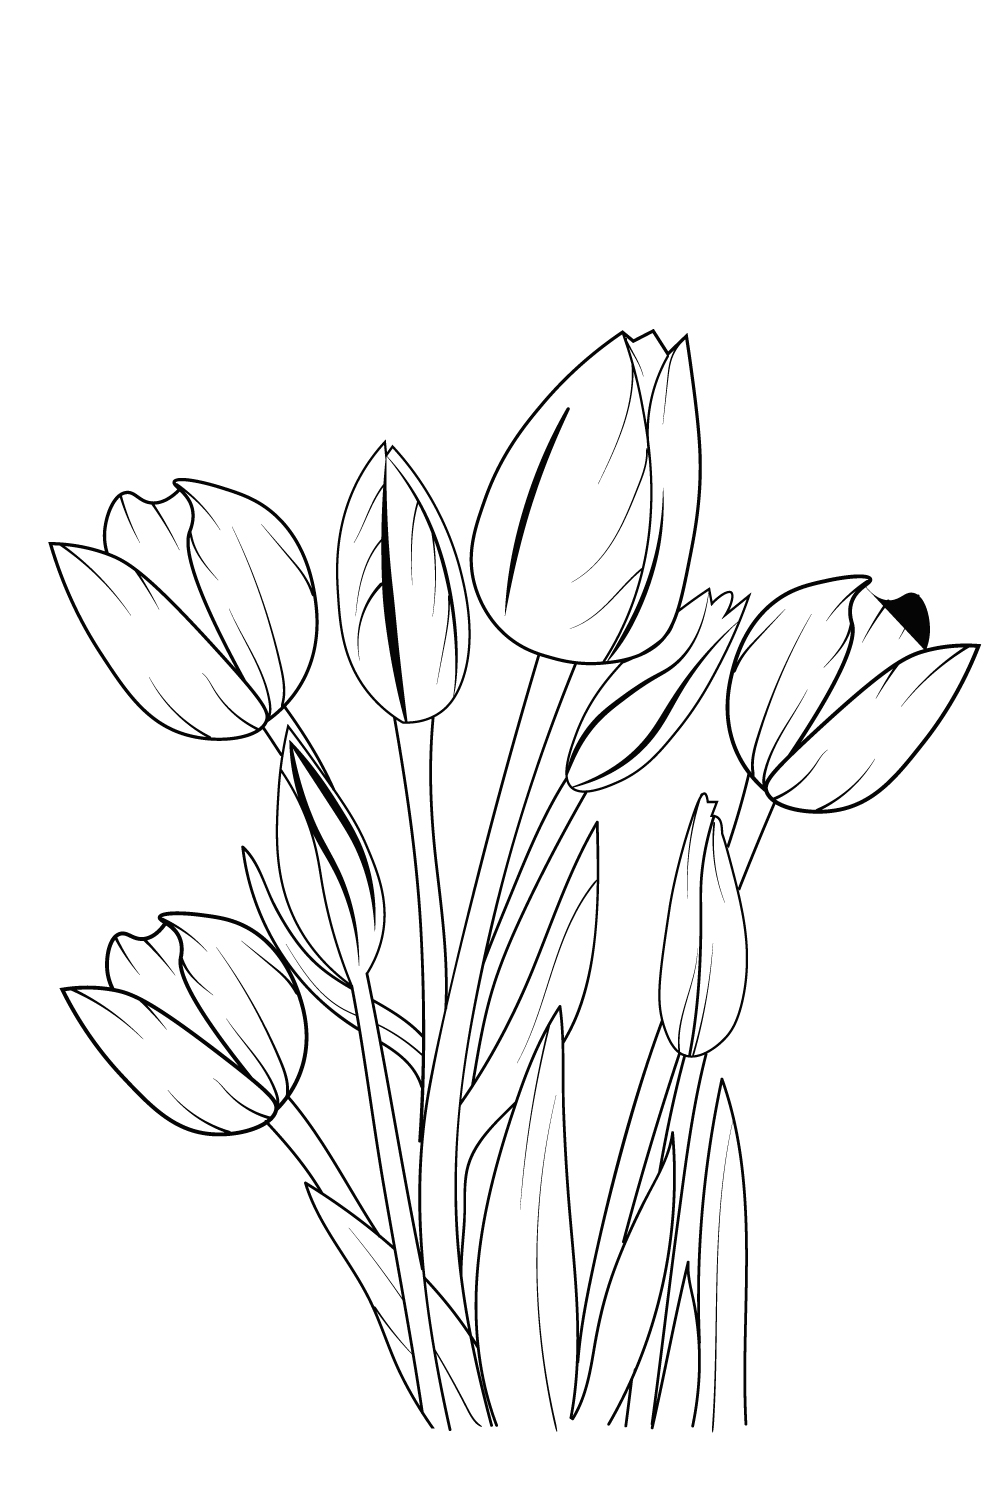 realistic tulip flower drawing, outline tulip flower drawing, tulip flower line drawing, sketch tulip drawing, pinterest preview image.